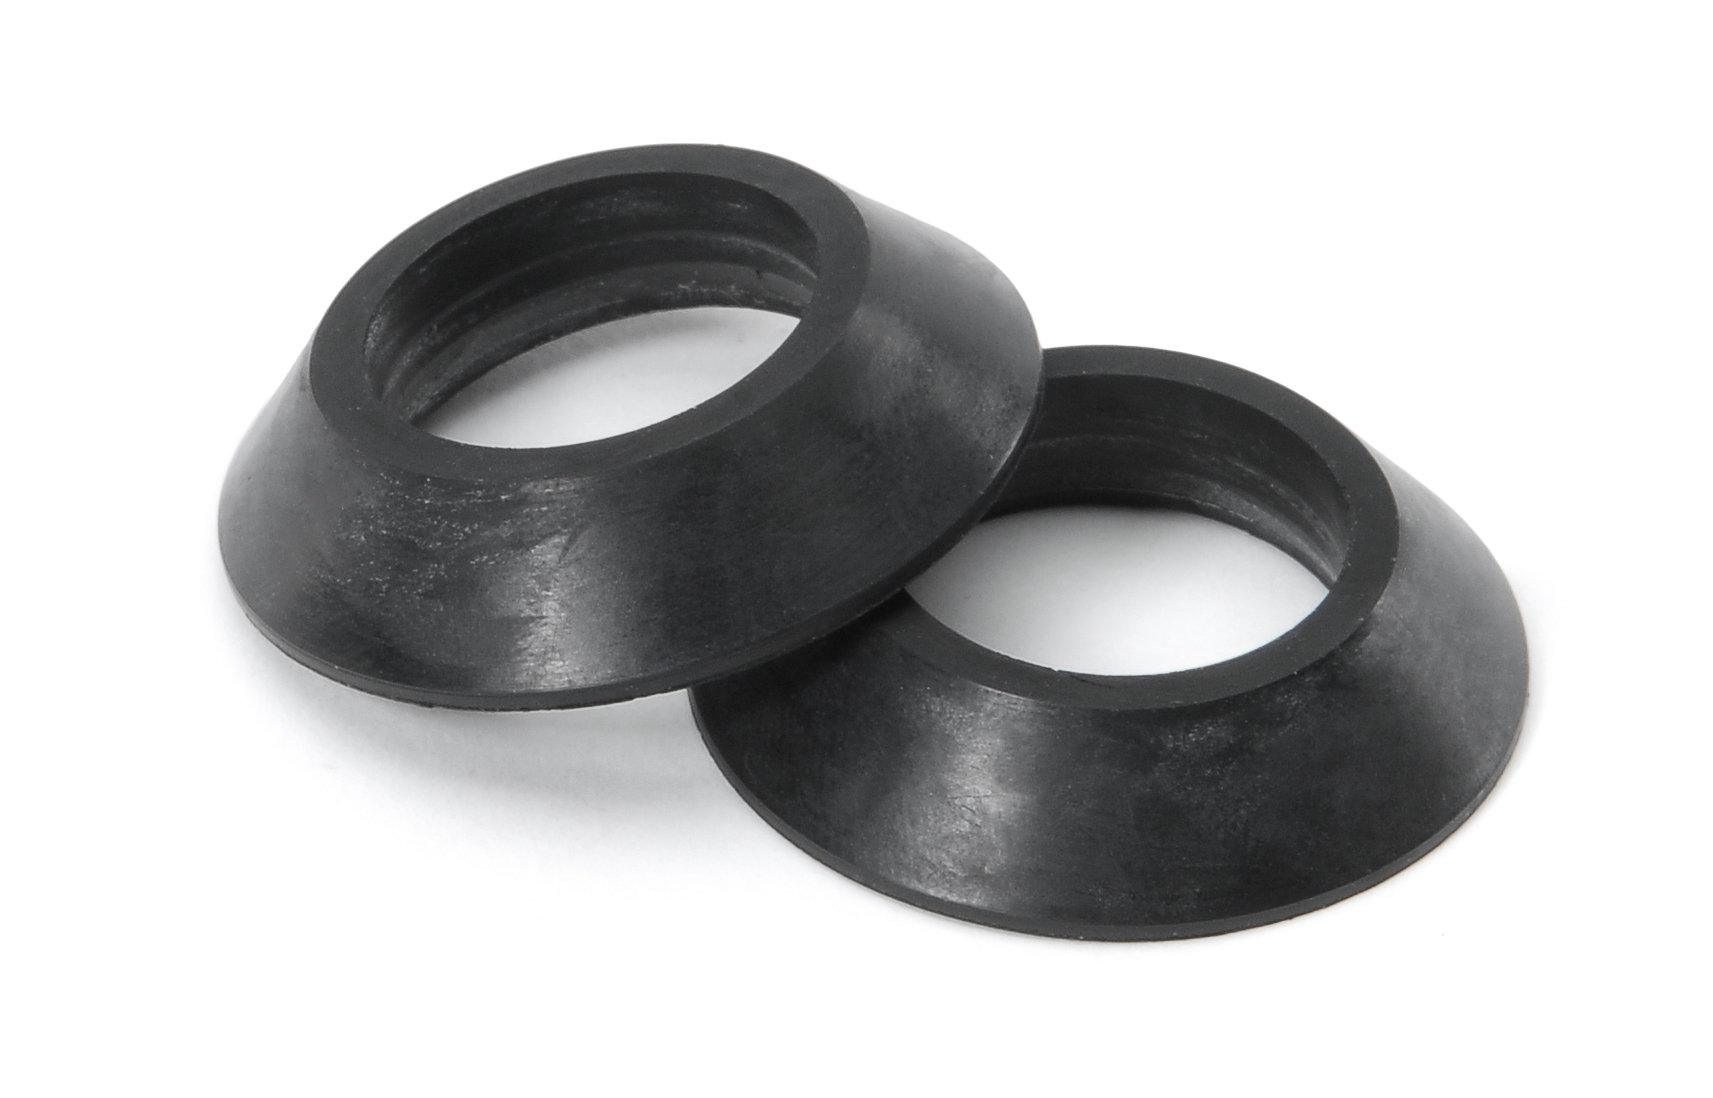 Crown Automotive RT33008 Anti-Rattle D-Ring Spacers for 3/4 D-Rings